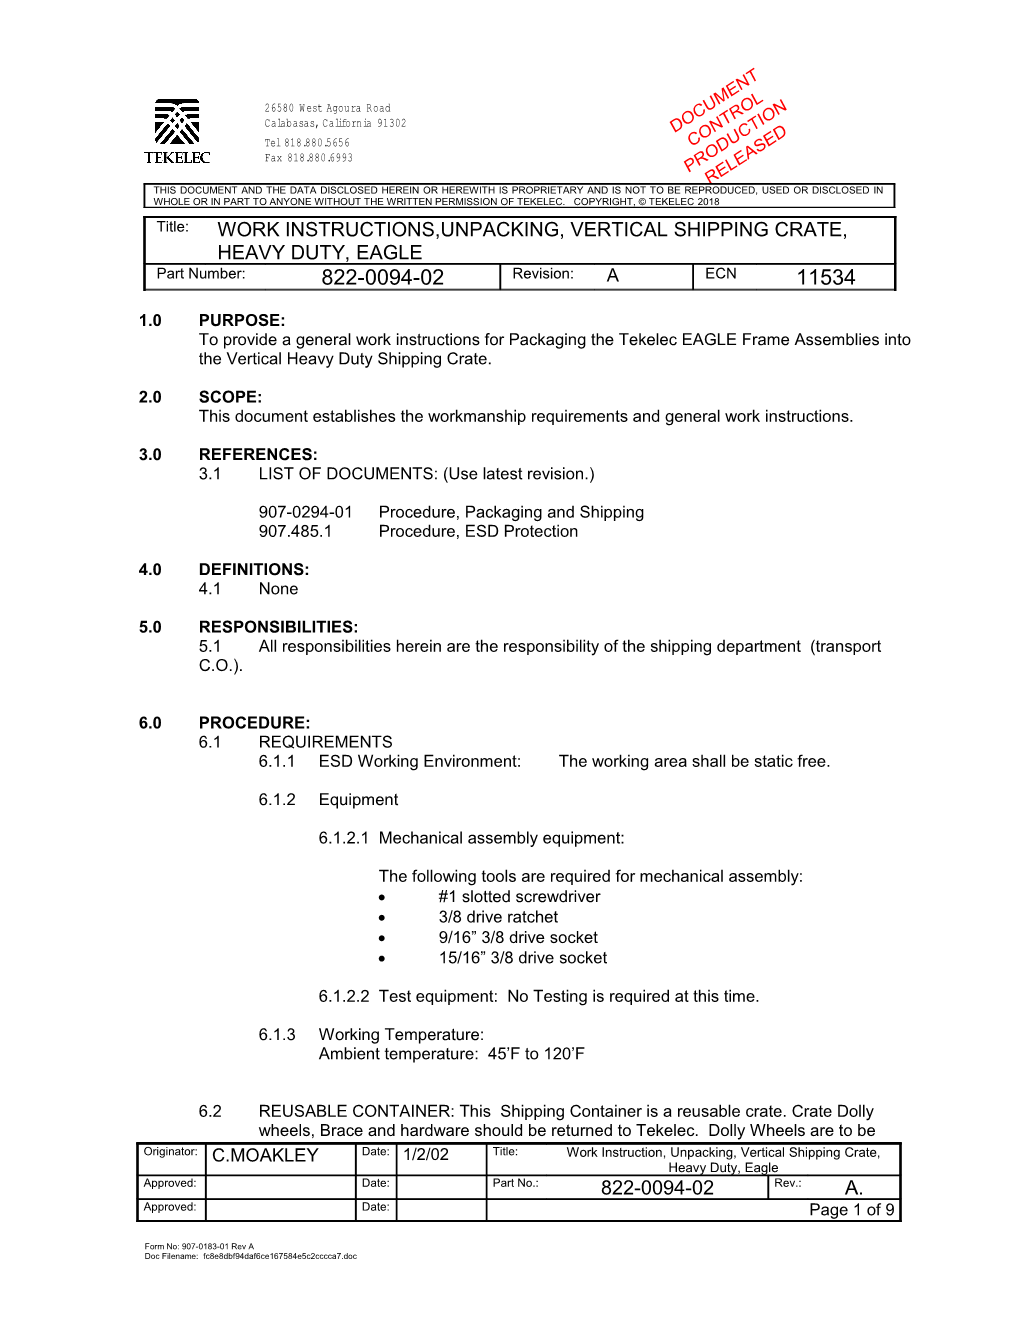 This Document Establishes the Workmanship Requirements and General Work Instructions s1